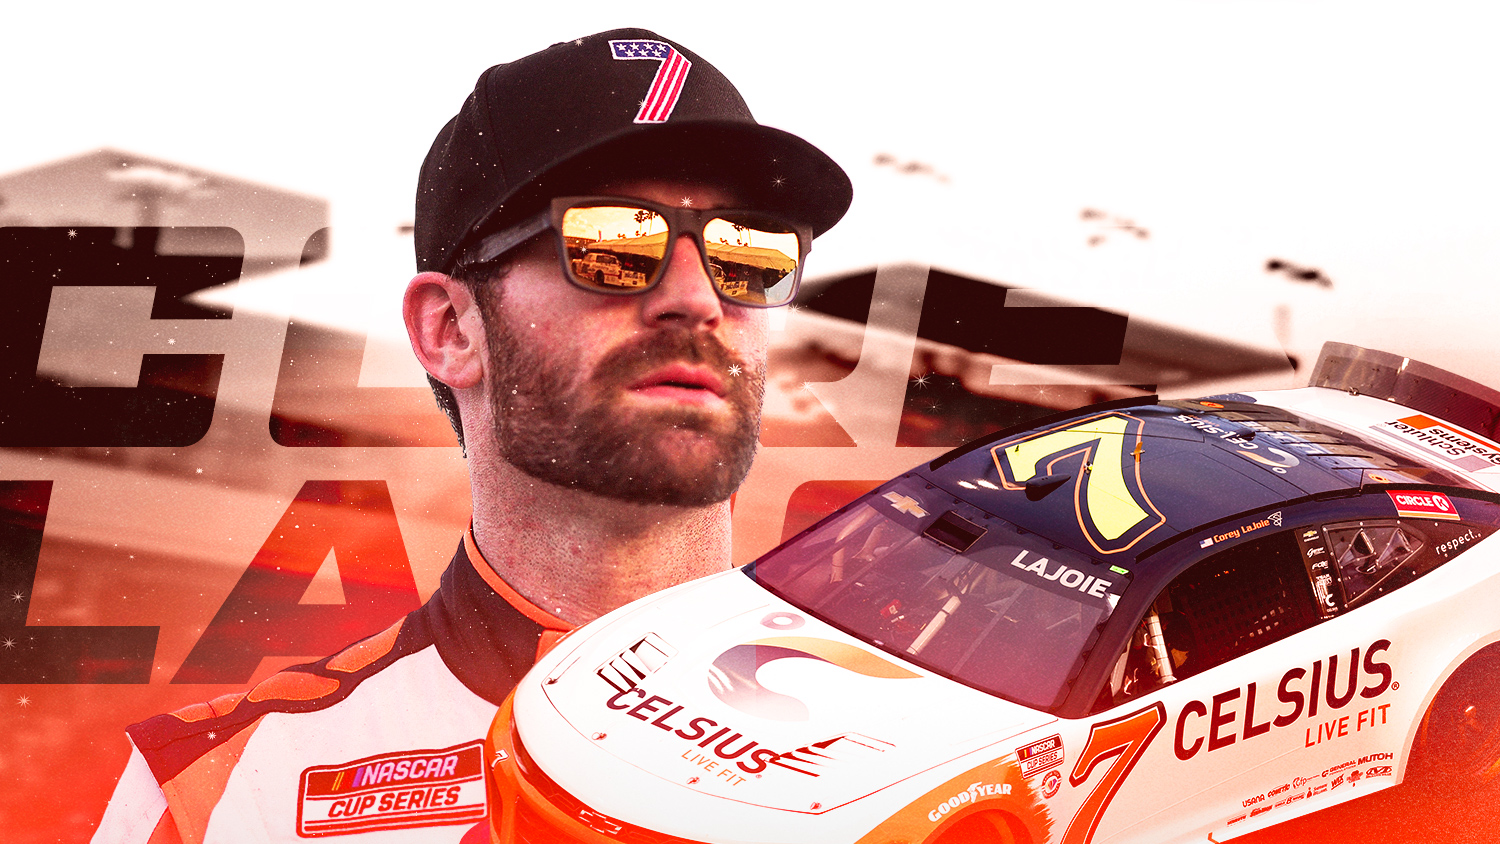 Corey LaJoie signs multiyear contract extension with Spire Motorsports